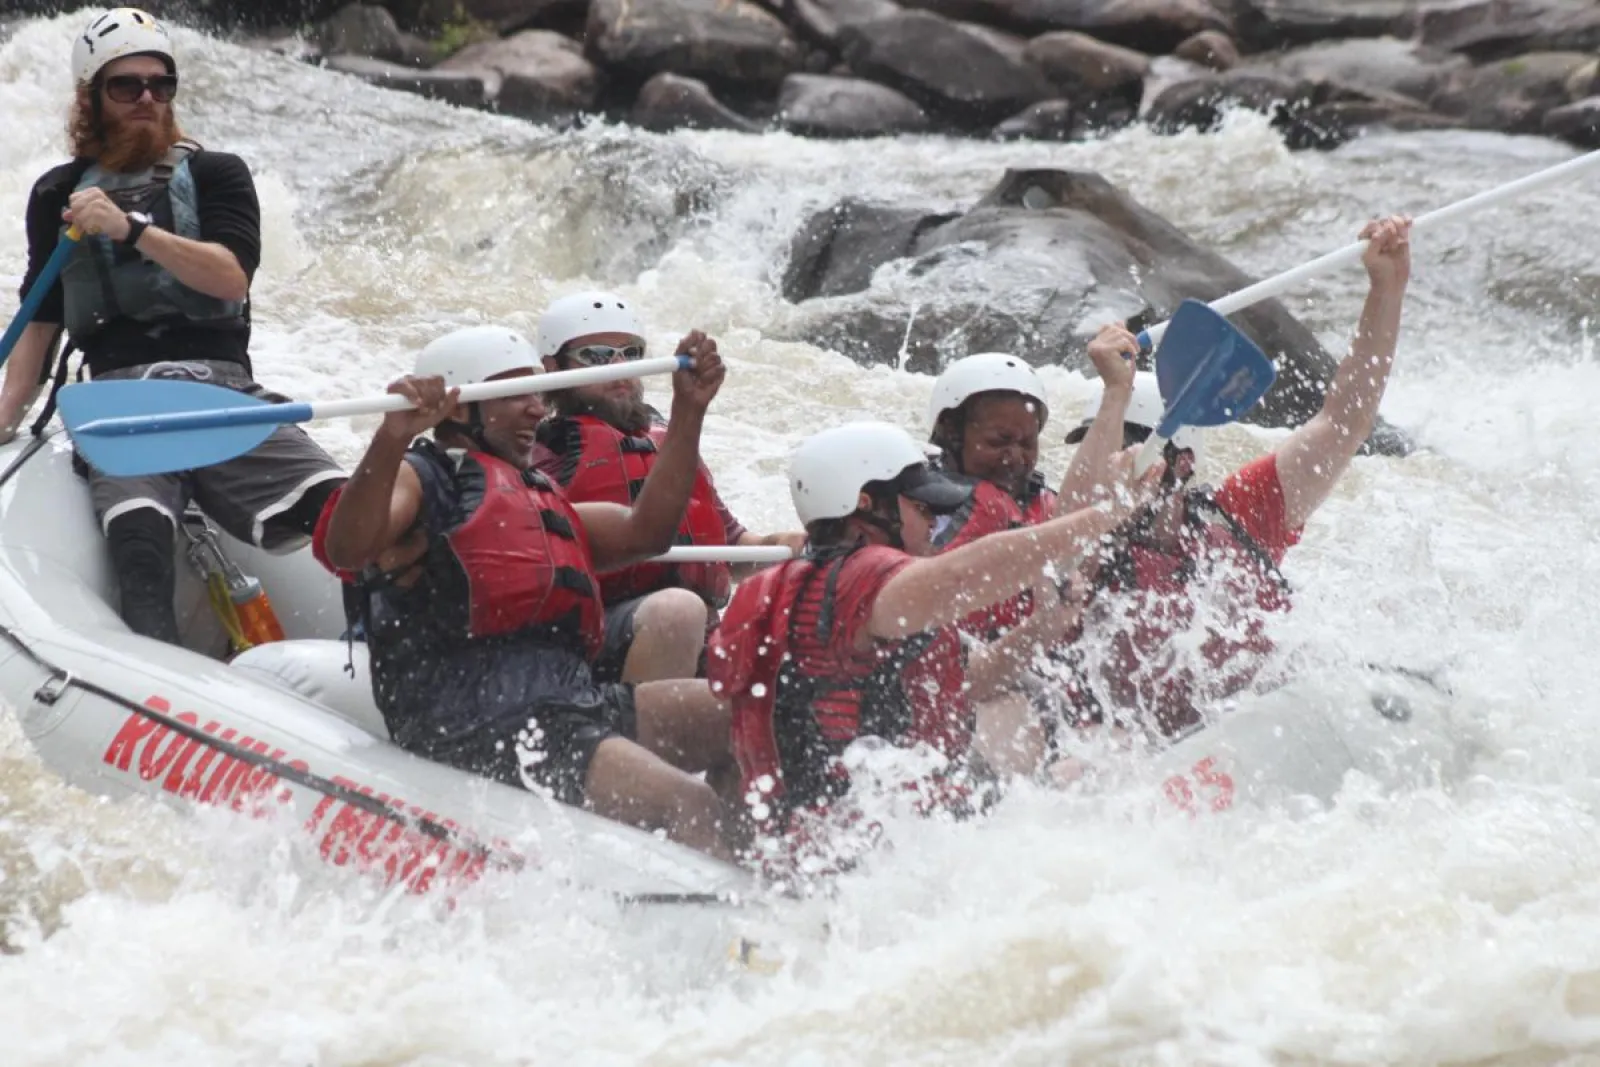 a group of people riding on the rapids in a raft